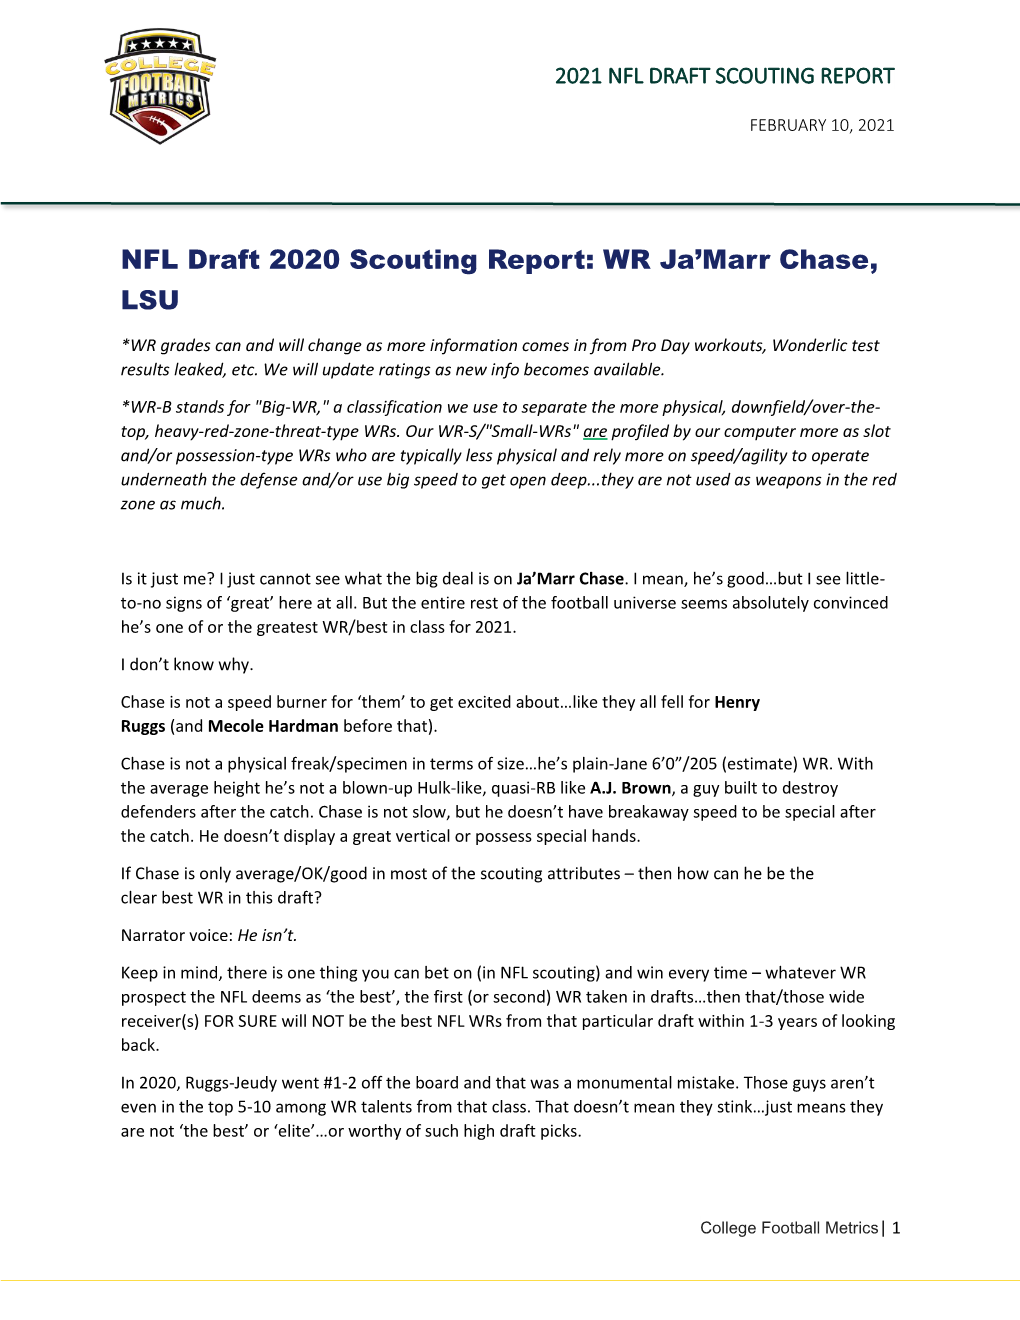 NFL Draft 2020 Scouting Report: WR Ja'marr Chase